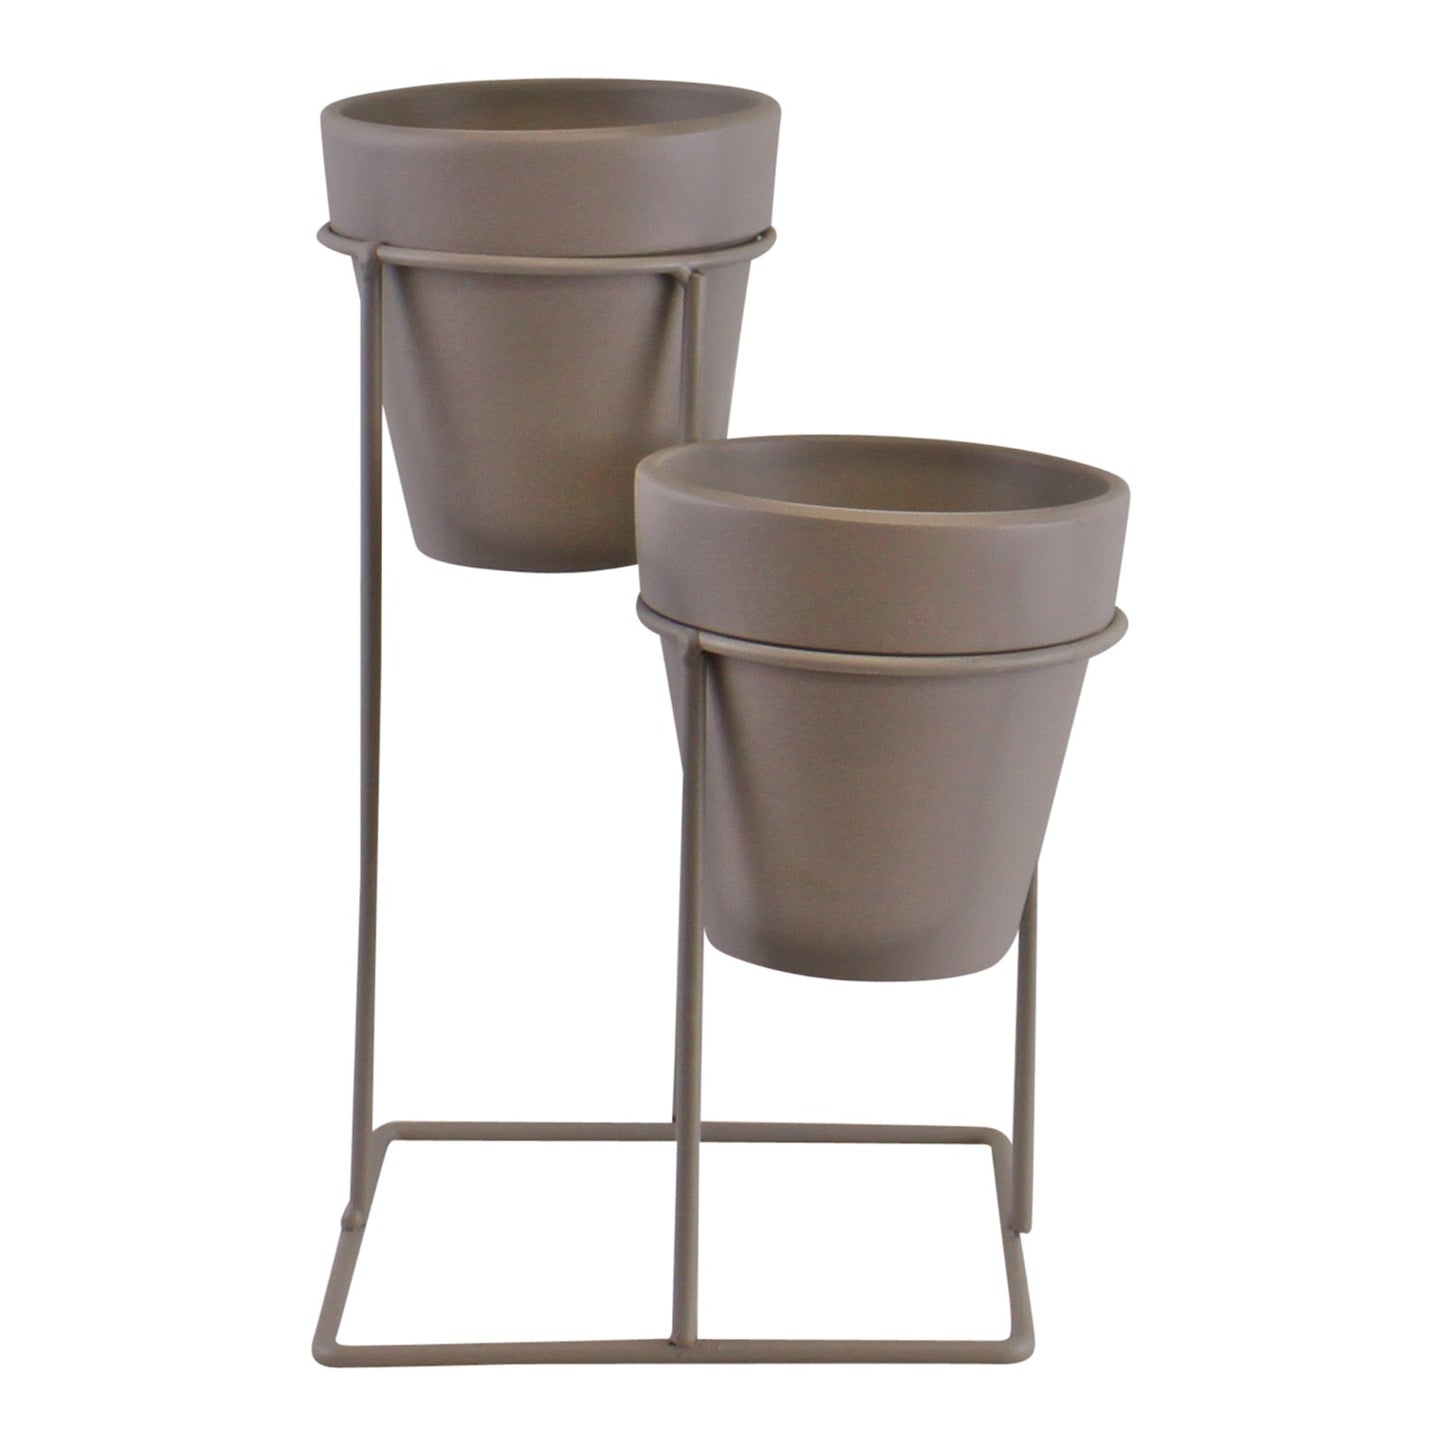 Potting Shed Small Double Planter On Stand, Grey